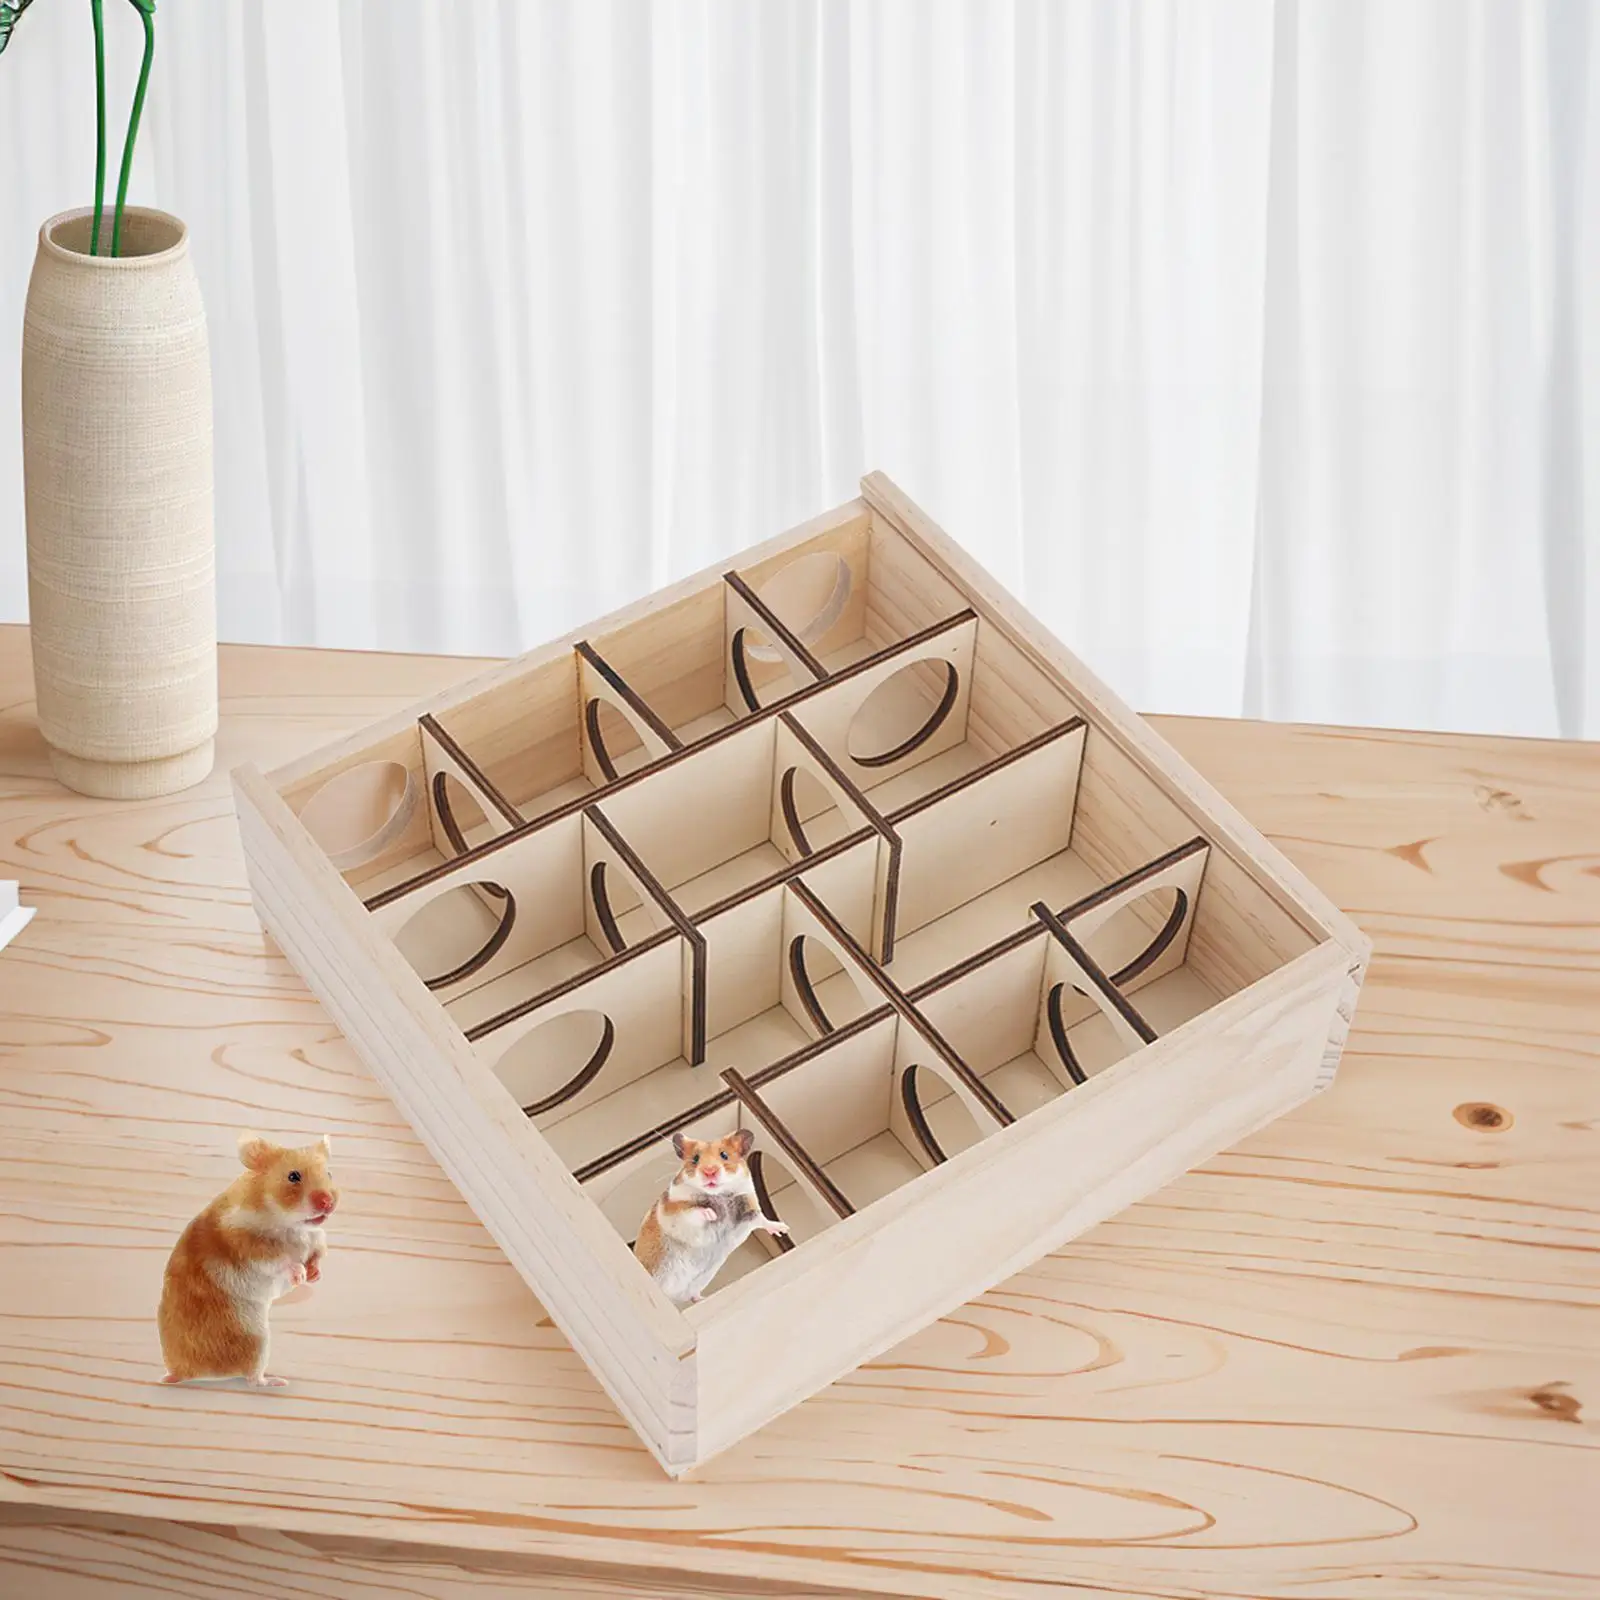 Pet Hamster House Small Animals Multi Chamber Wooden Maze for Dwarf Hamsters